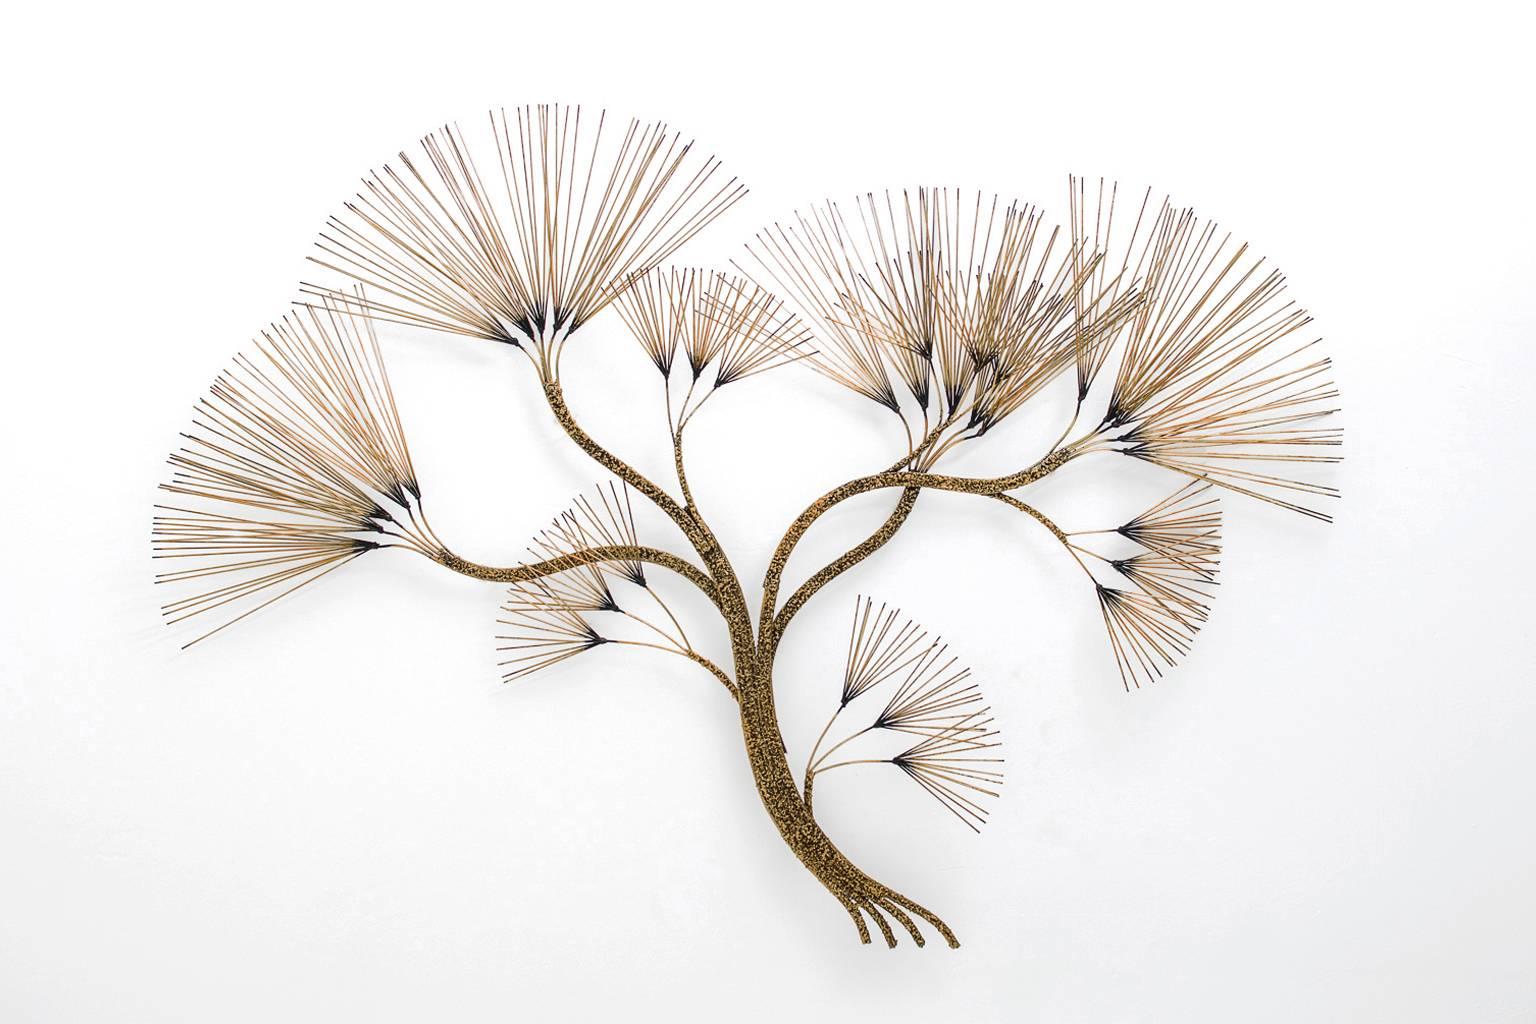 Brass wall sculpture by Curtis Jeré, USA, 1970s. Very decorative and impressive piece imagine a tree or bush. Very well made with a beautiful structure on the branches and a nice overall warm patine on the brass. The sculpture hangs (5 cm) from the